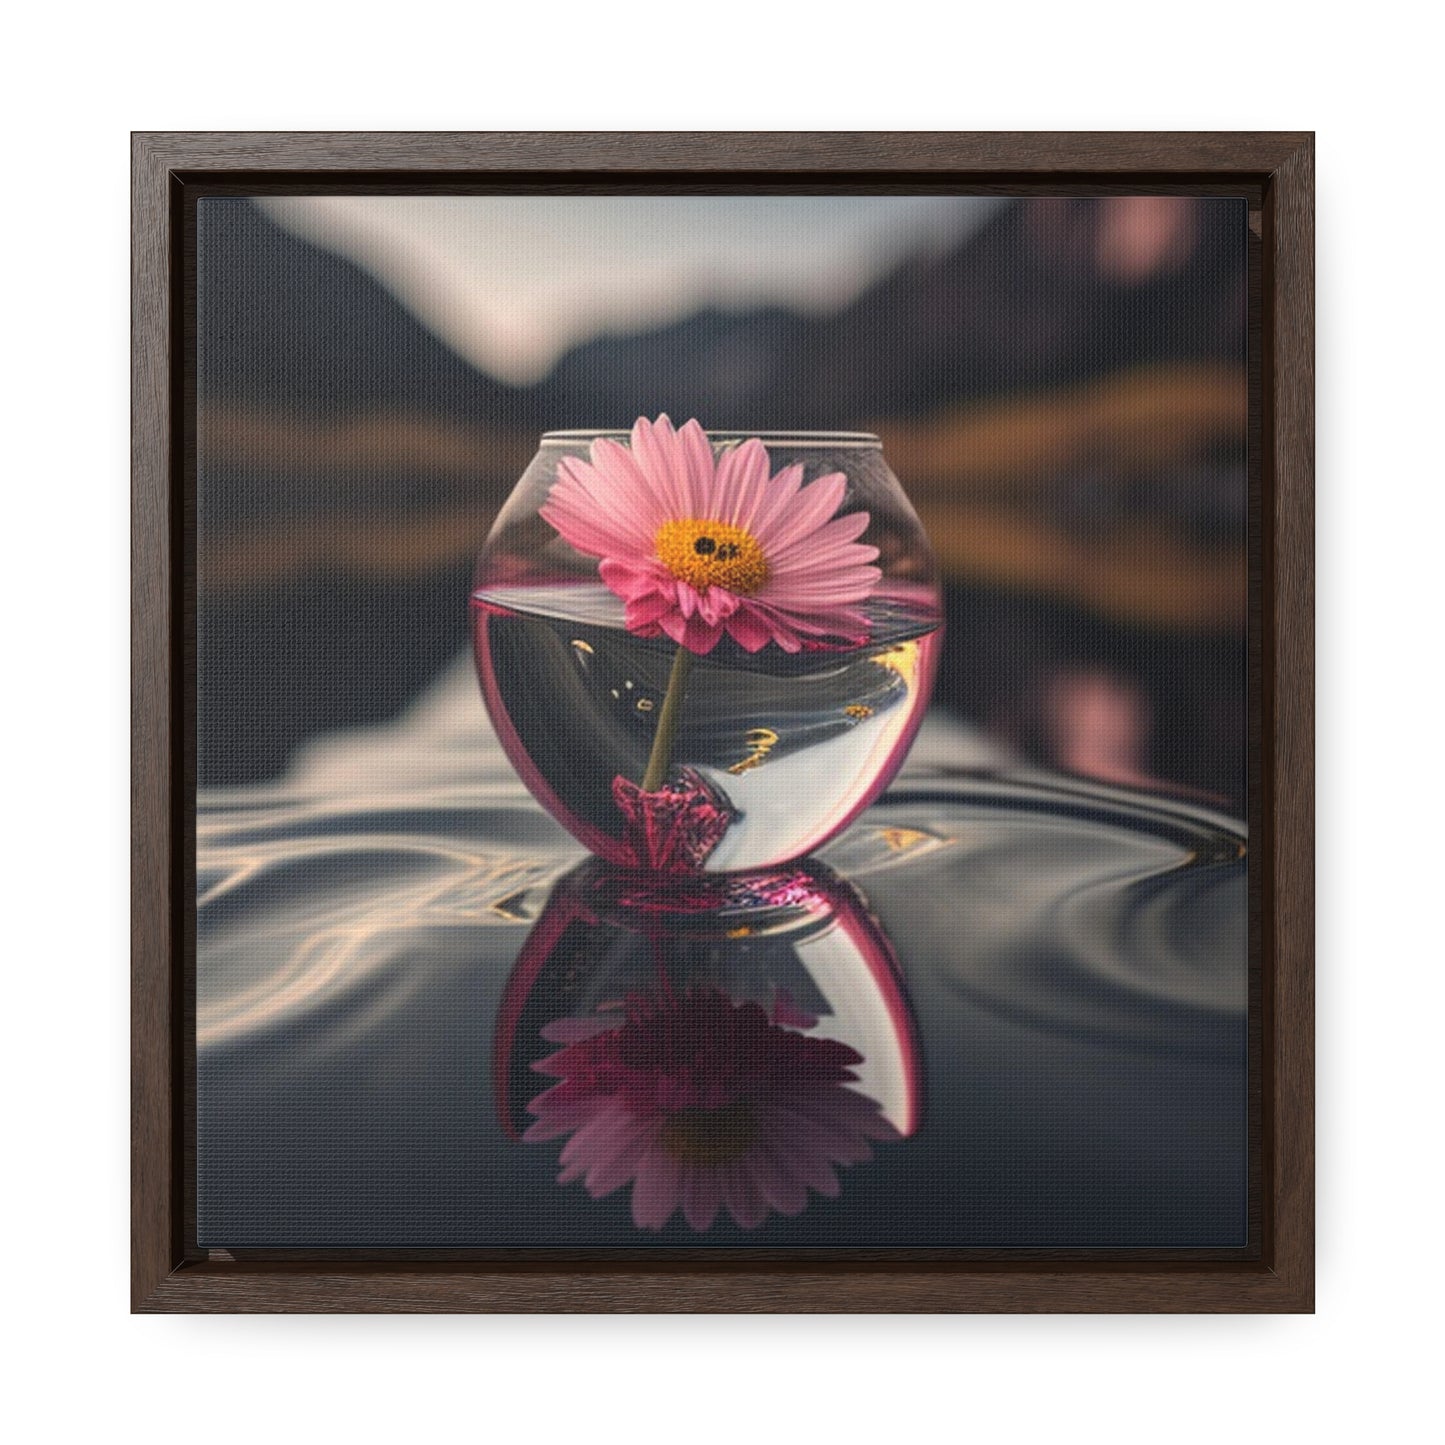 Gallery Canvas Wraps, Square Frame Pink Daisy 1